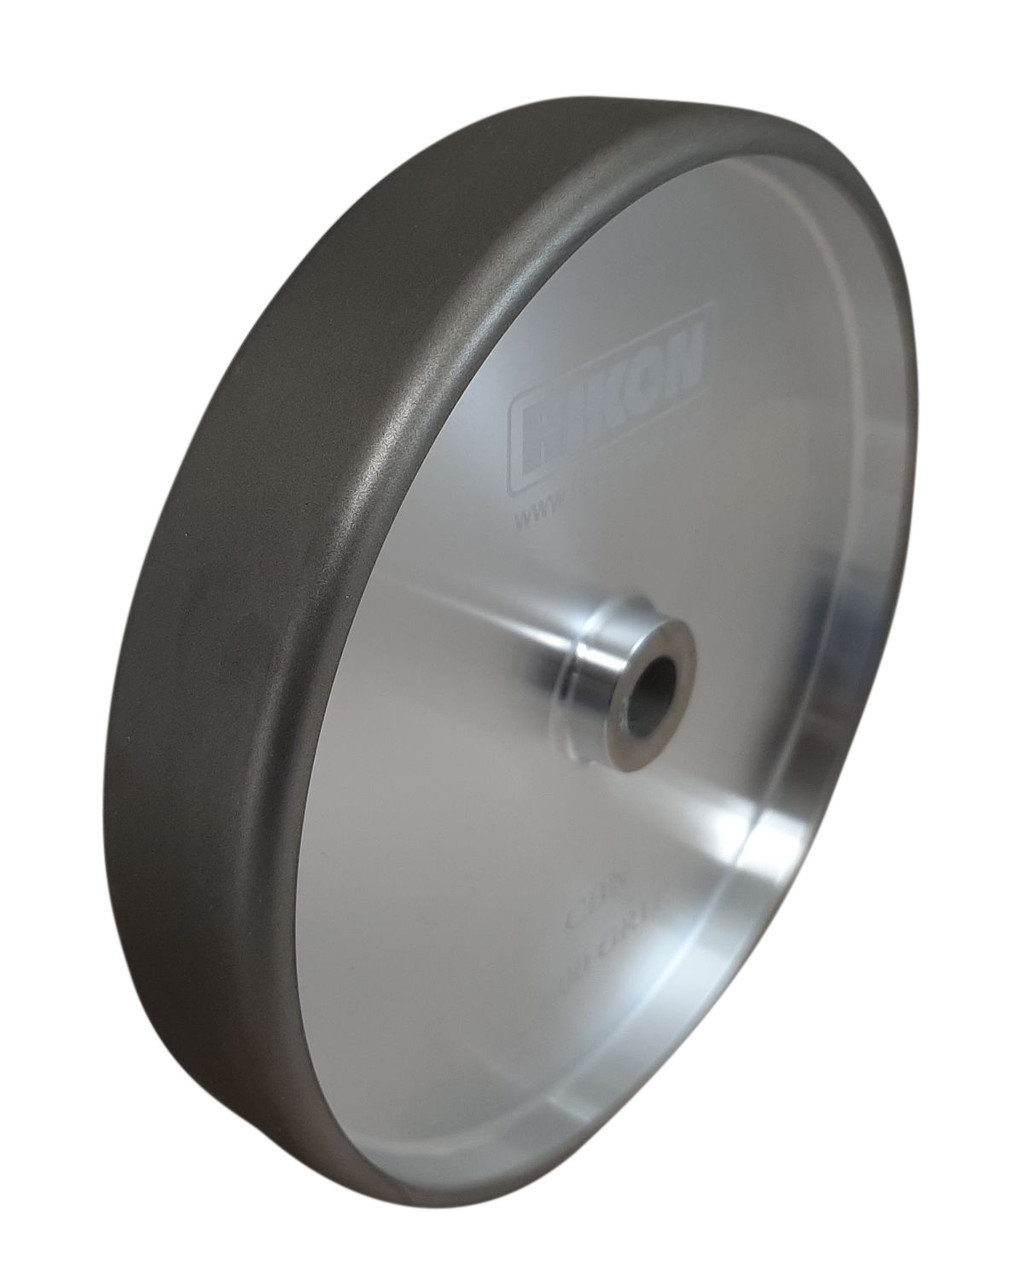 Rikon PRO Series 82-5600R CBN Grinding Wheel 600 Grit 8 inch Wheel 1-1/2 inch wide with Radius to Sharpen High Speed Steel Cutting Tools for your Woodworking Lathe